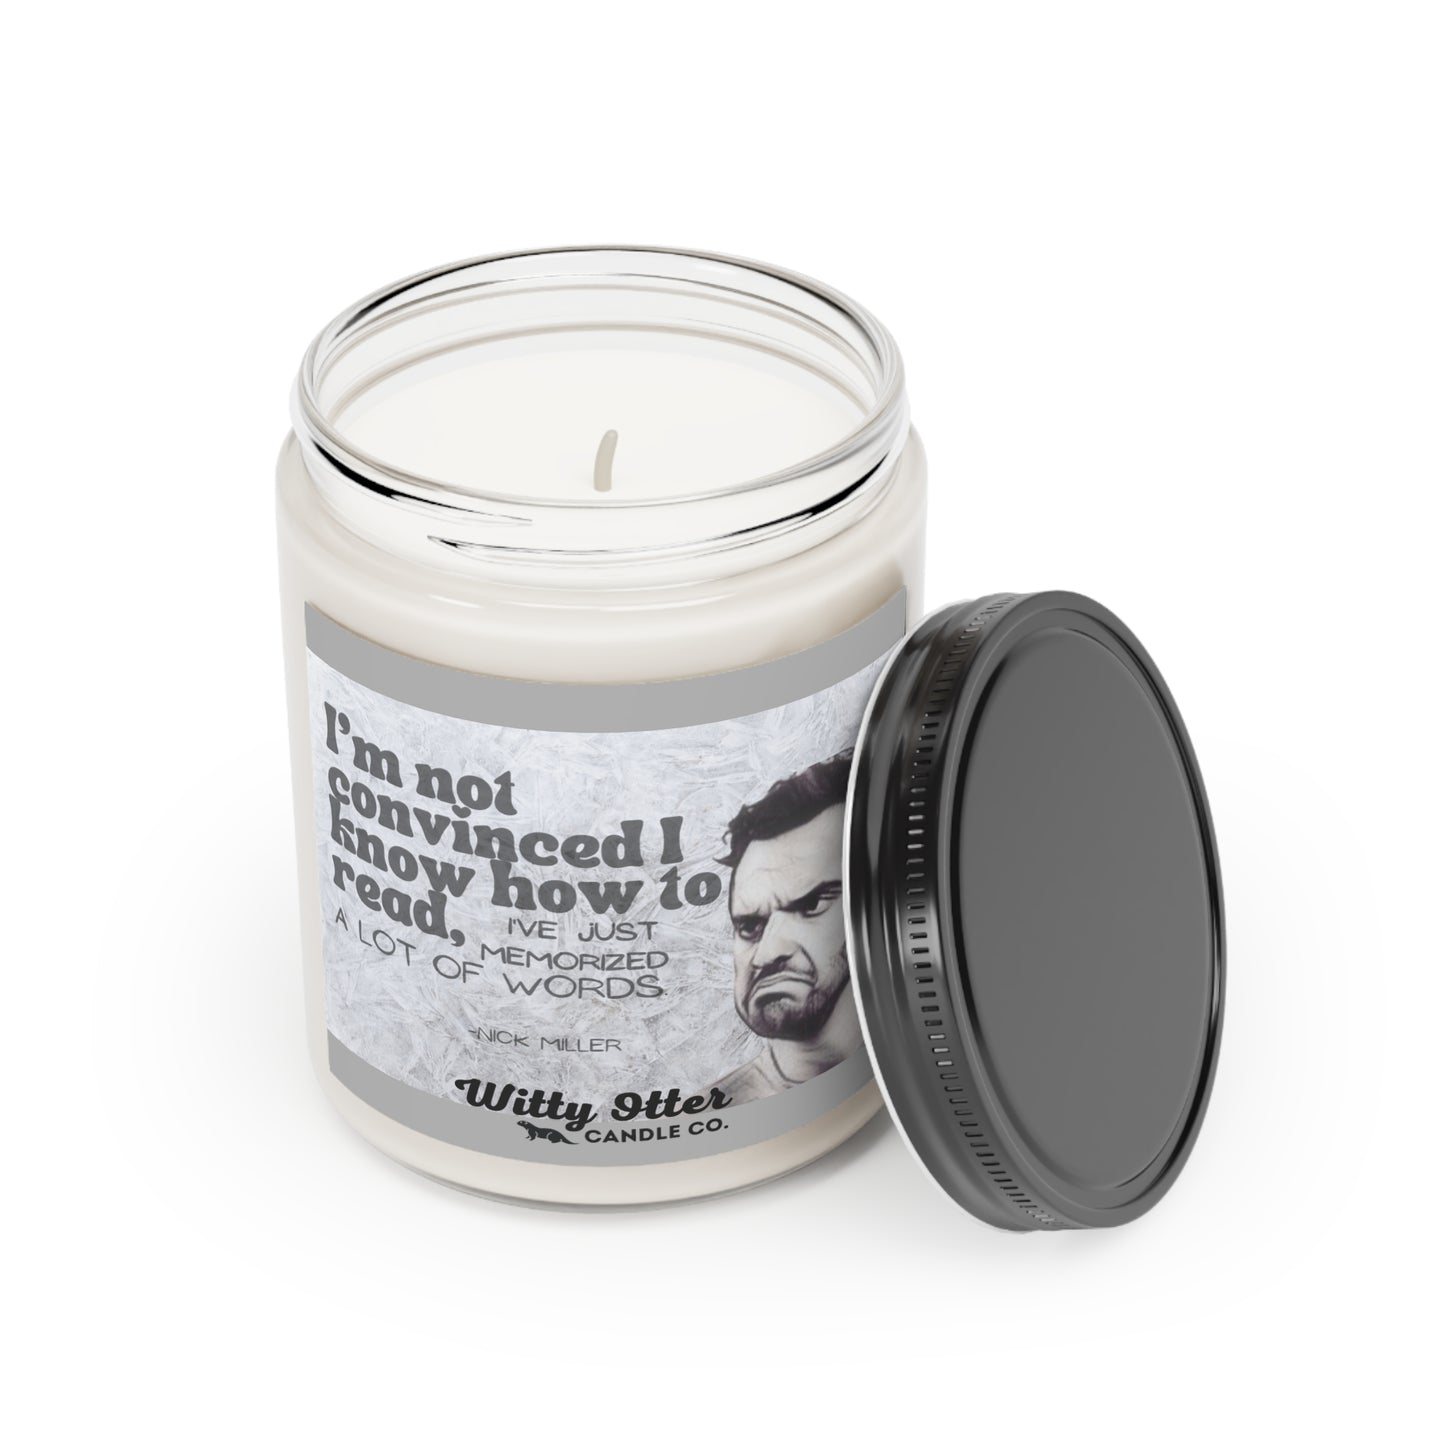 Nick Miller "Reading" quote 9oz soy candle | New Girl show candle